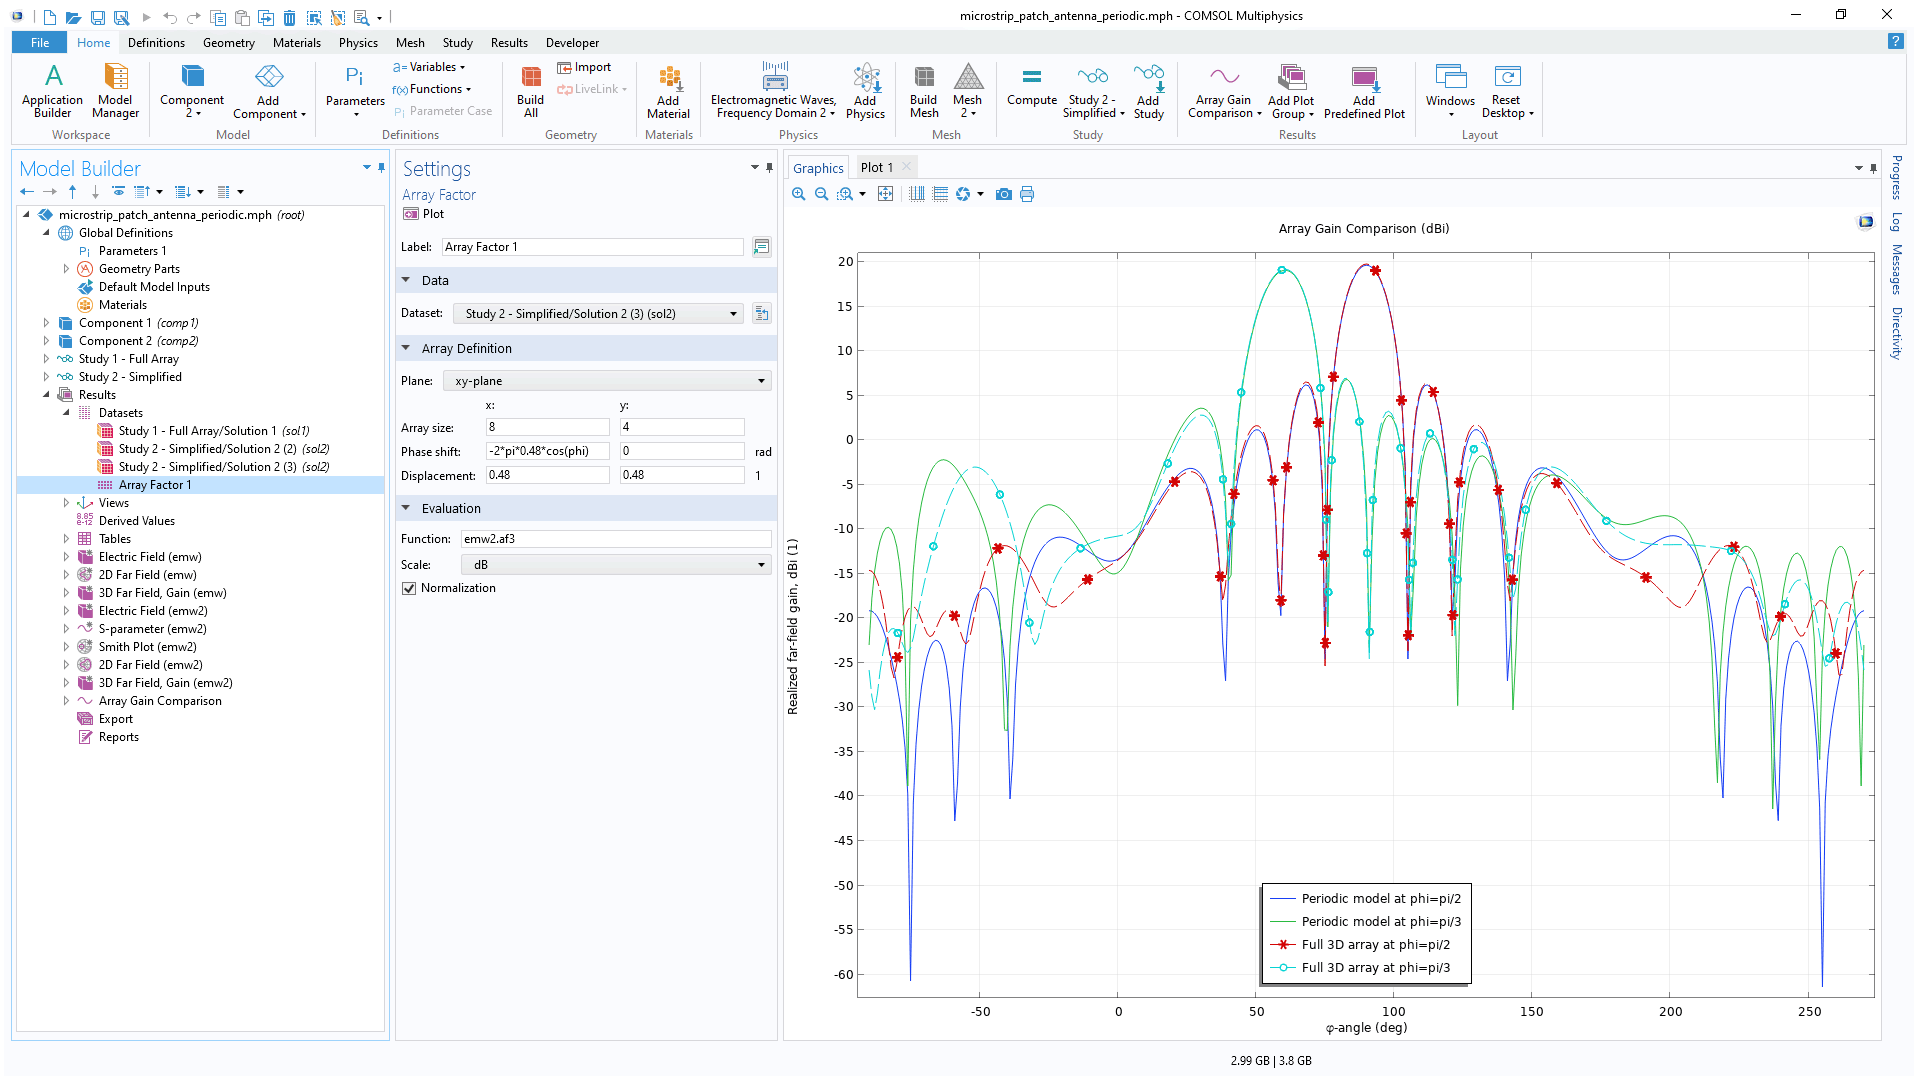 The COMSOL Multiphysics UI showing the Model Builder with the Array Factor dataset selected, the corresponding settings, and the Graphics window showing a comparison plot for the array gain.